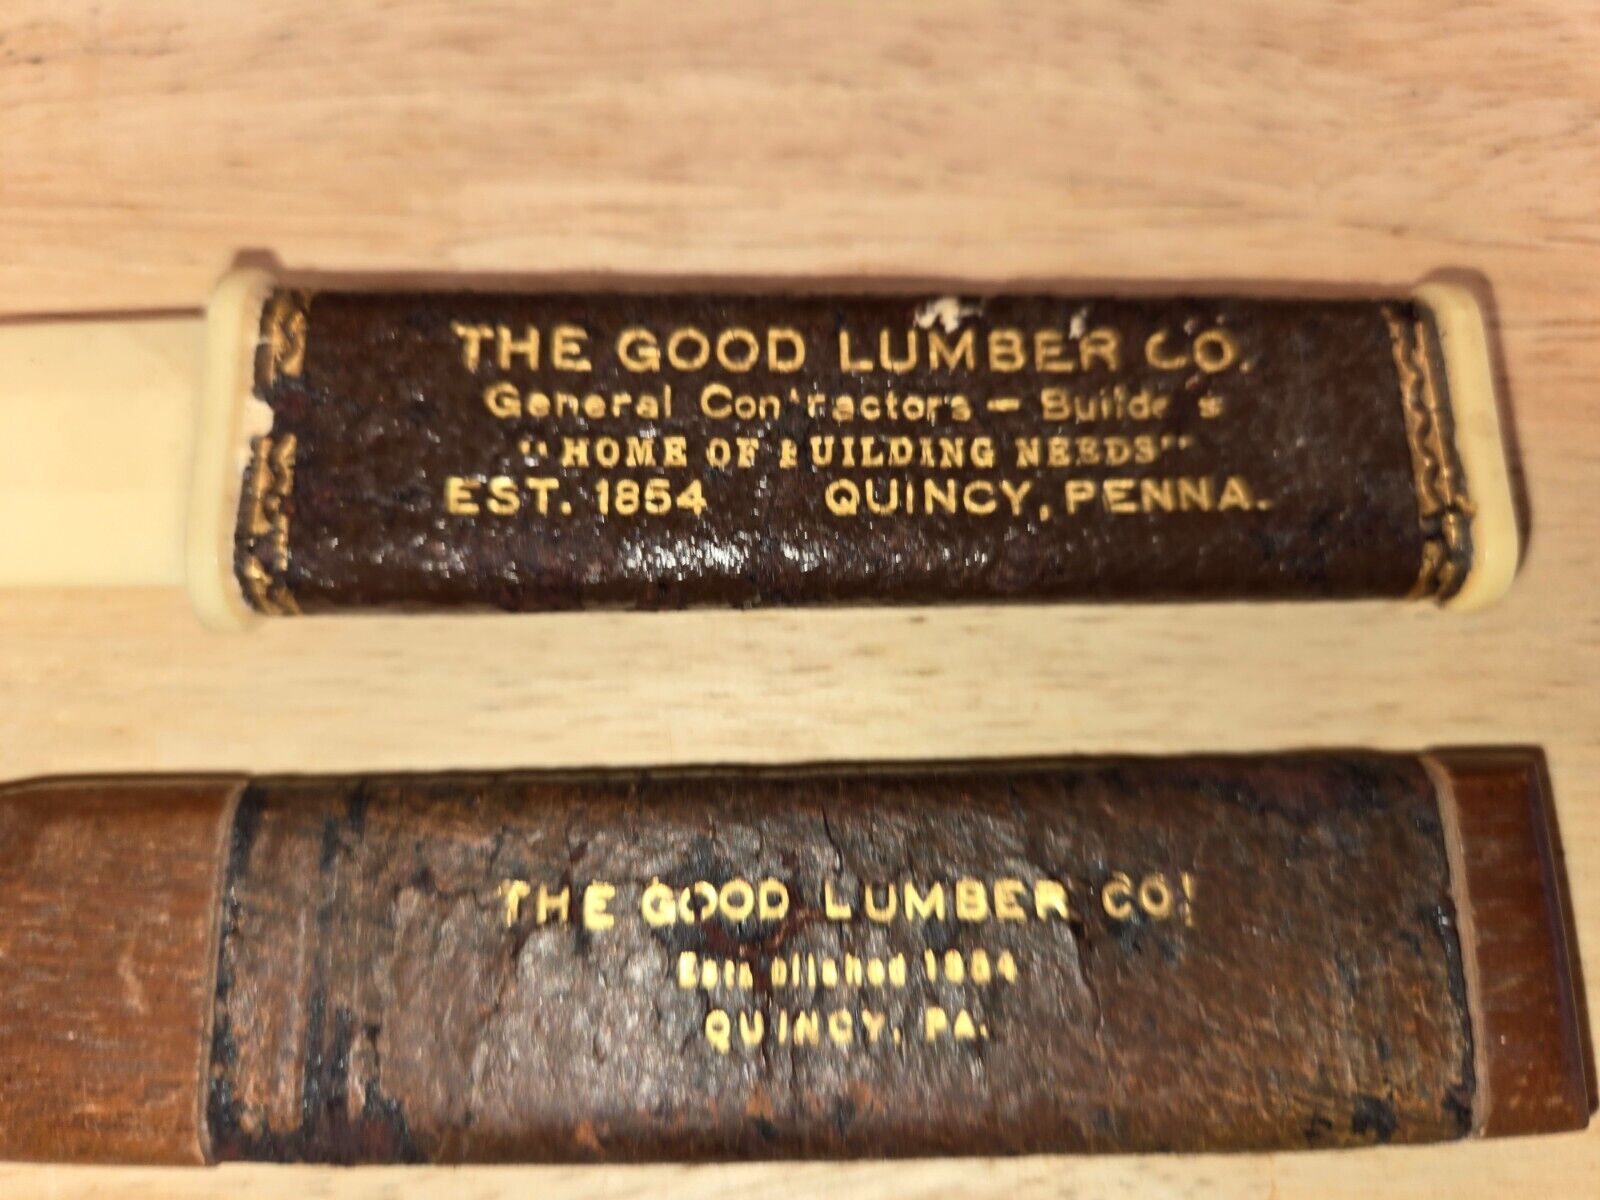 VTG PAIR THE GOOD LUMBER COMPANY QUINCY PENNSYLVANIA WOOD PLASTIC LETTER OPENERS